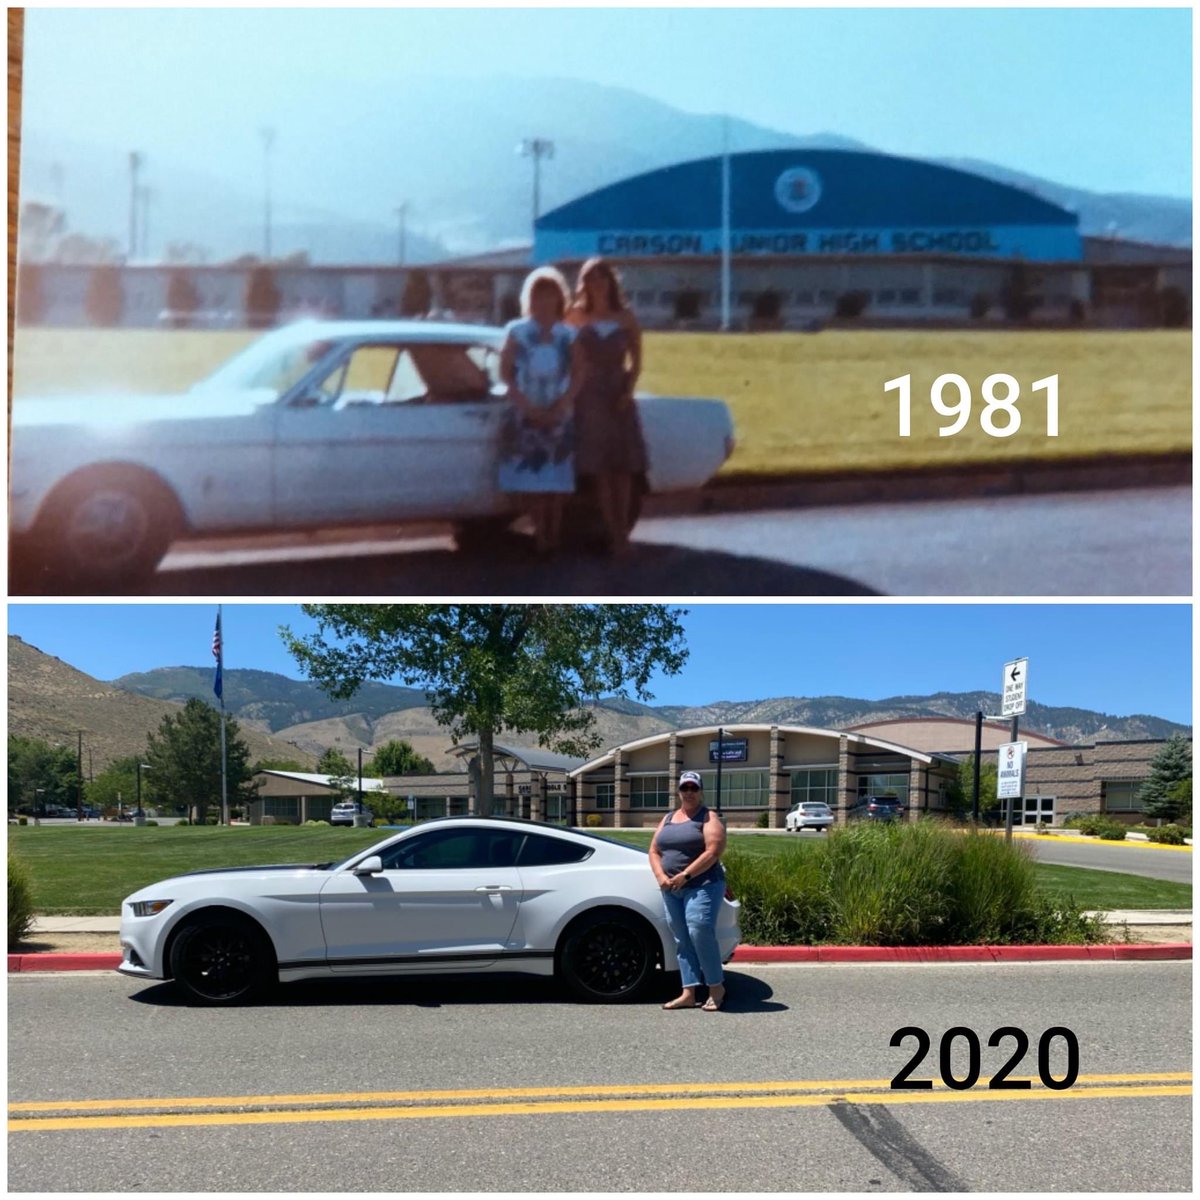 39 years later, and still living the #MustangLife! 🐎💯
Trudi learned to drive w/her '65 Mustang in high school. Flash forward to present day, where Trudi recreated her graduation photo w/her new '15 Mustang from #FordCountry. Thank you for sharing your #MustangStory, Trudi! 💙